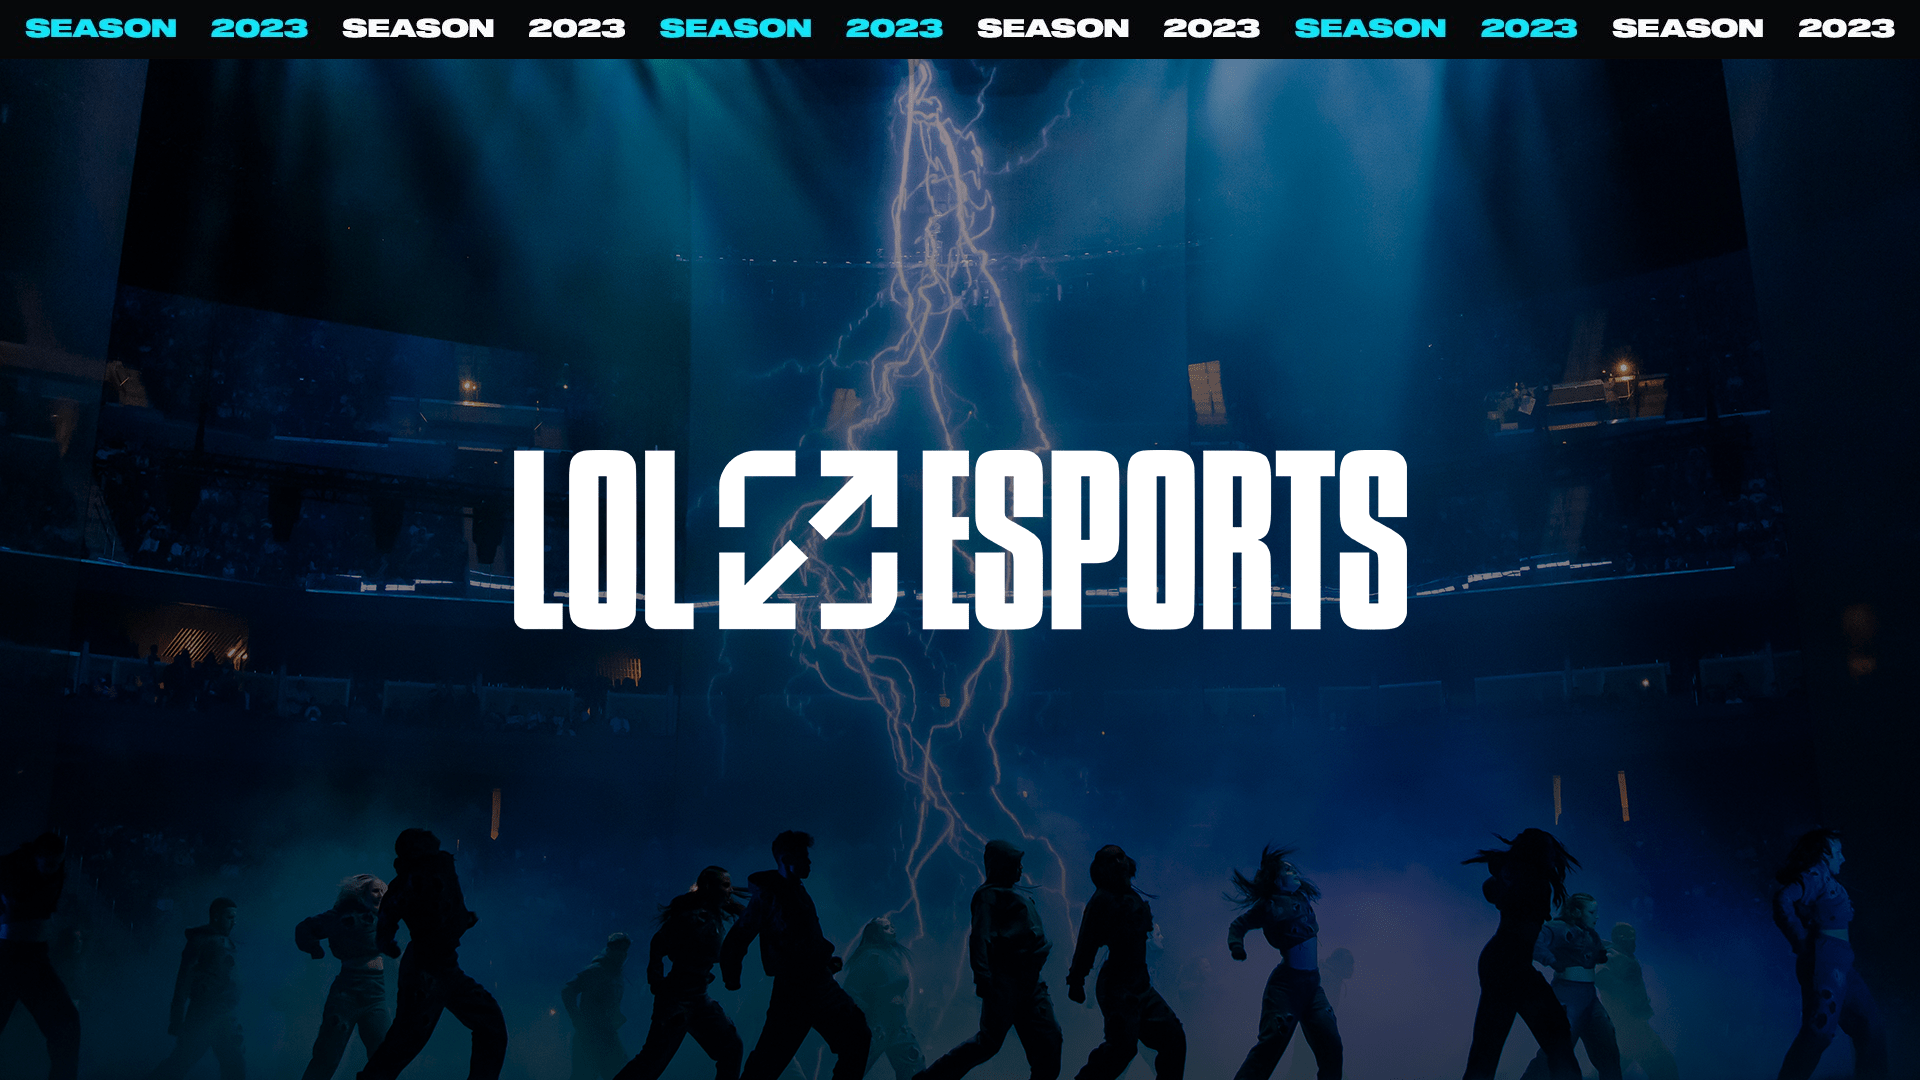 League of Legends 2023 Mid-Season Invitational and Worlds Formats Revealed